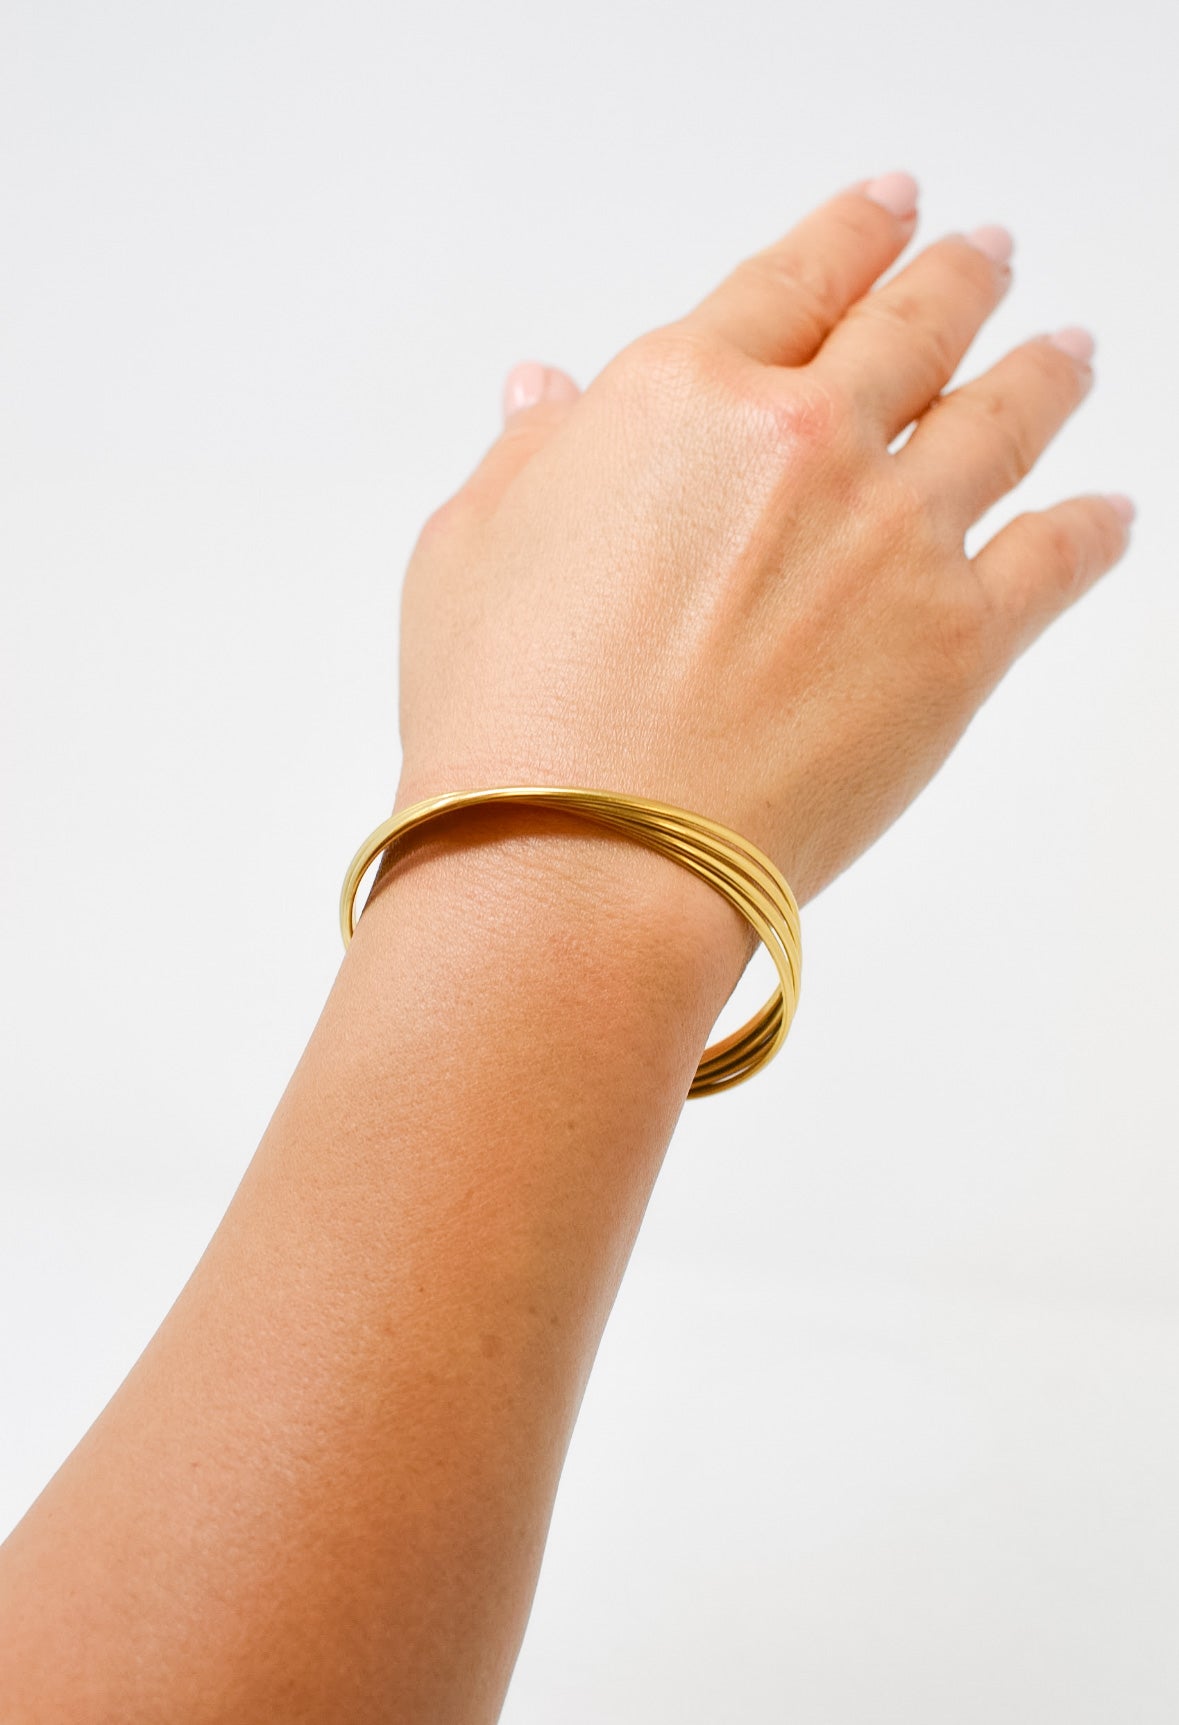 simply sophisticated and timeless,  gold bangle jewelry 